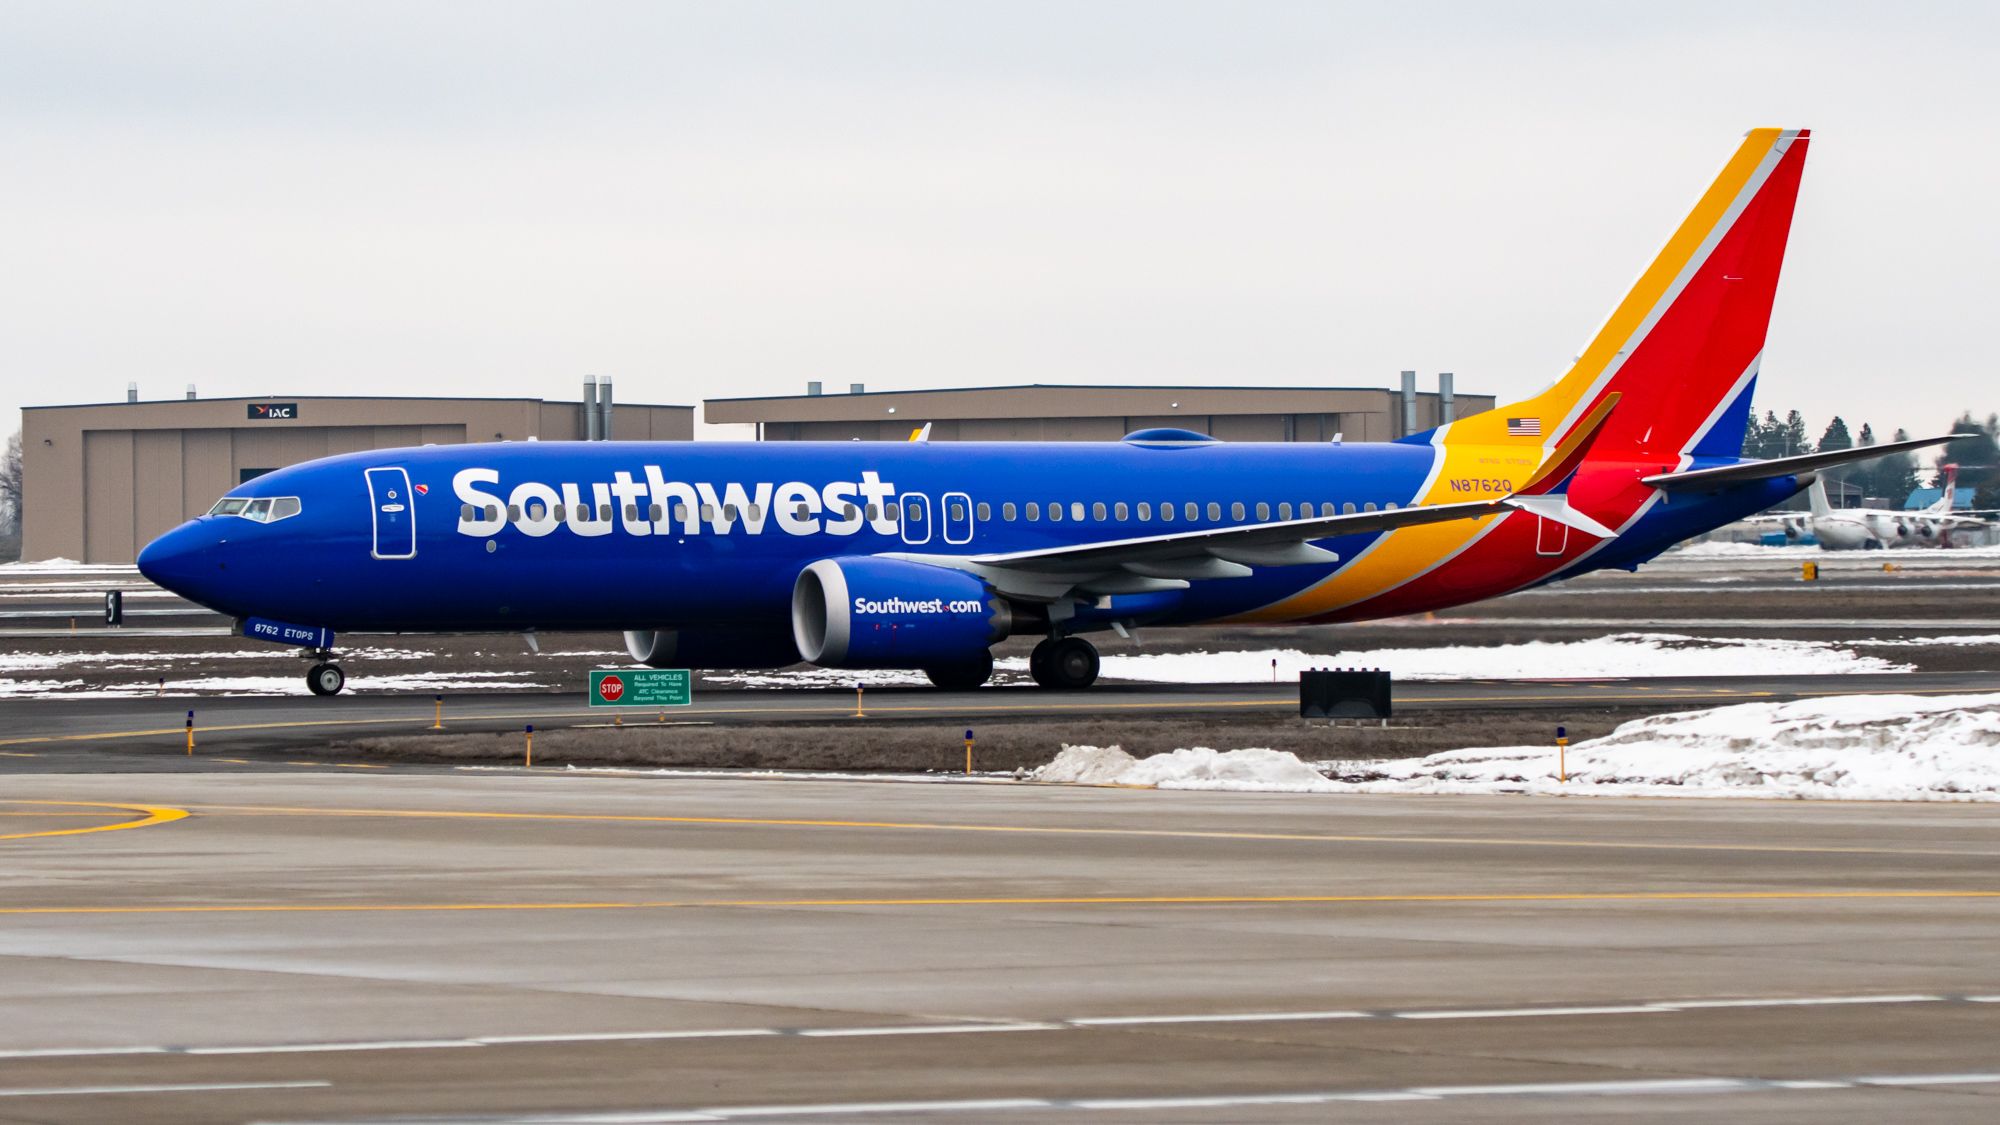 Southwest Airlines' 737 MAX 8 and Snow at Spokane International Airport (GEG)